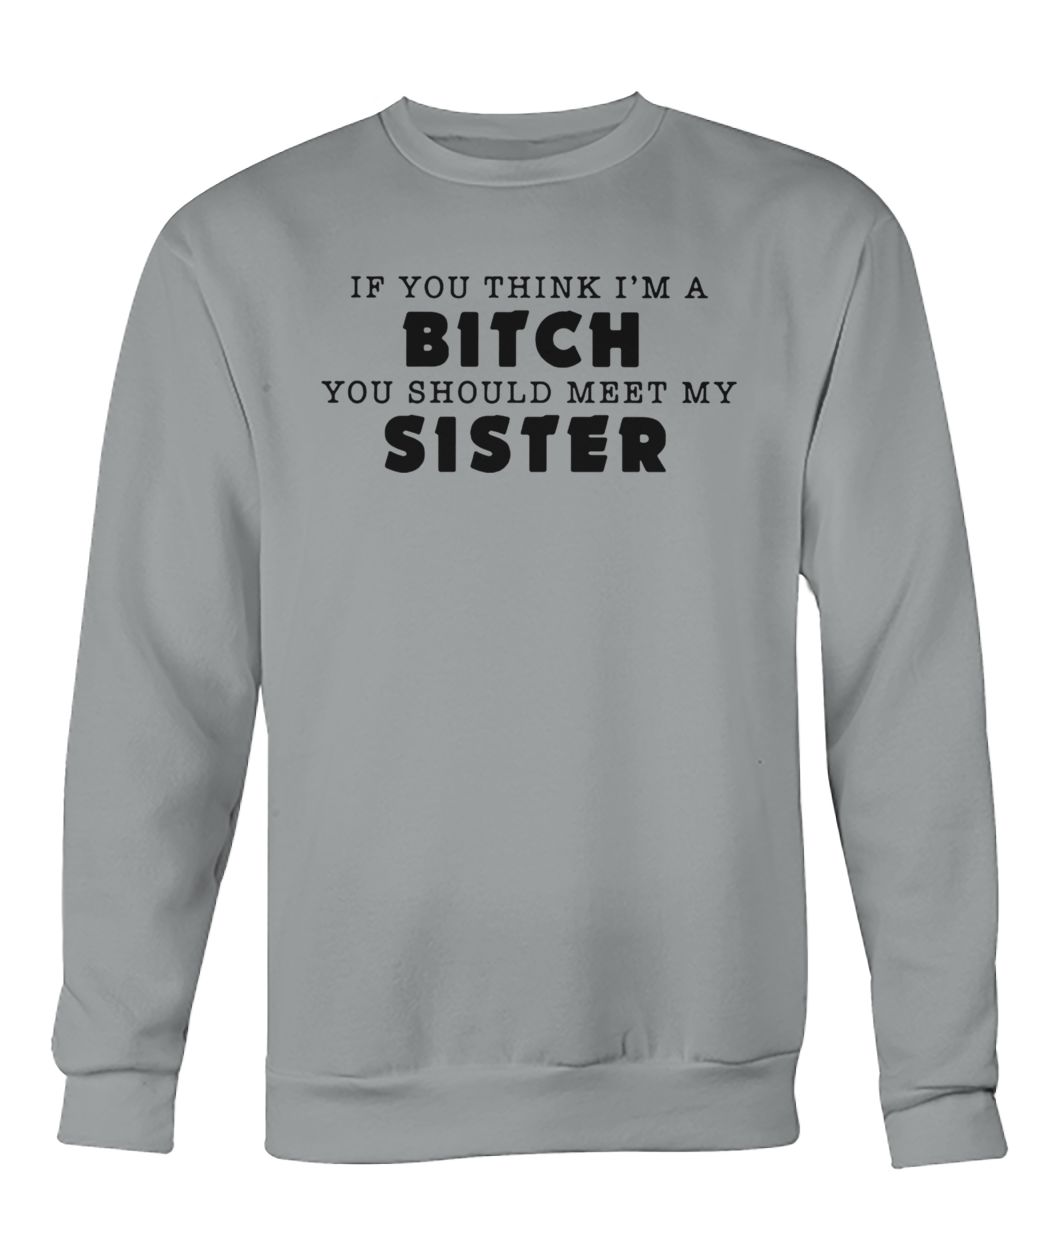 If you think I'm a bitch you should meet my sister crew neck sweatshirt